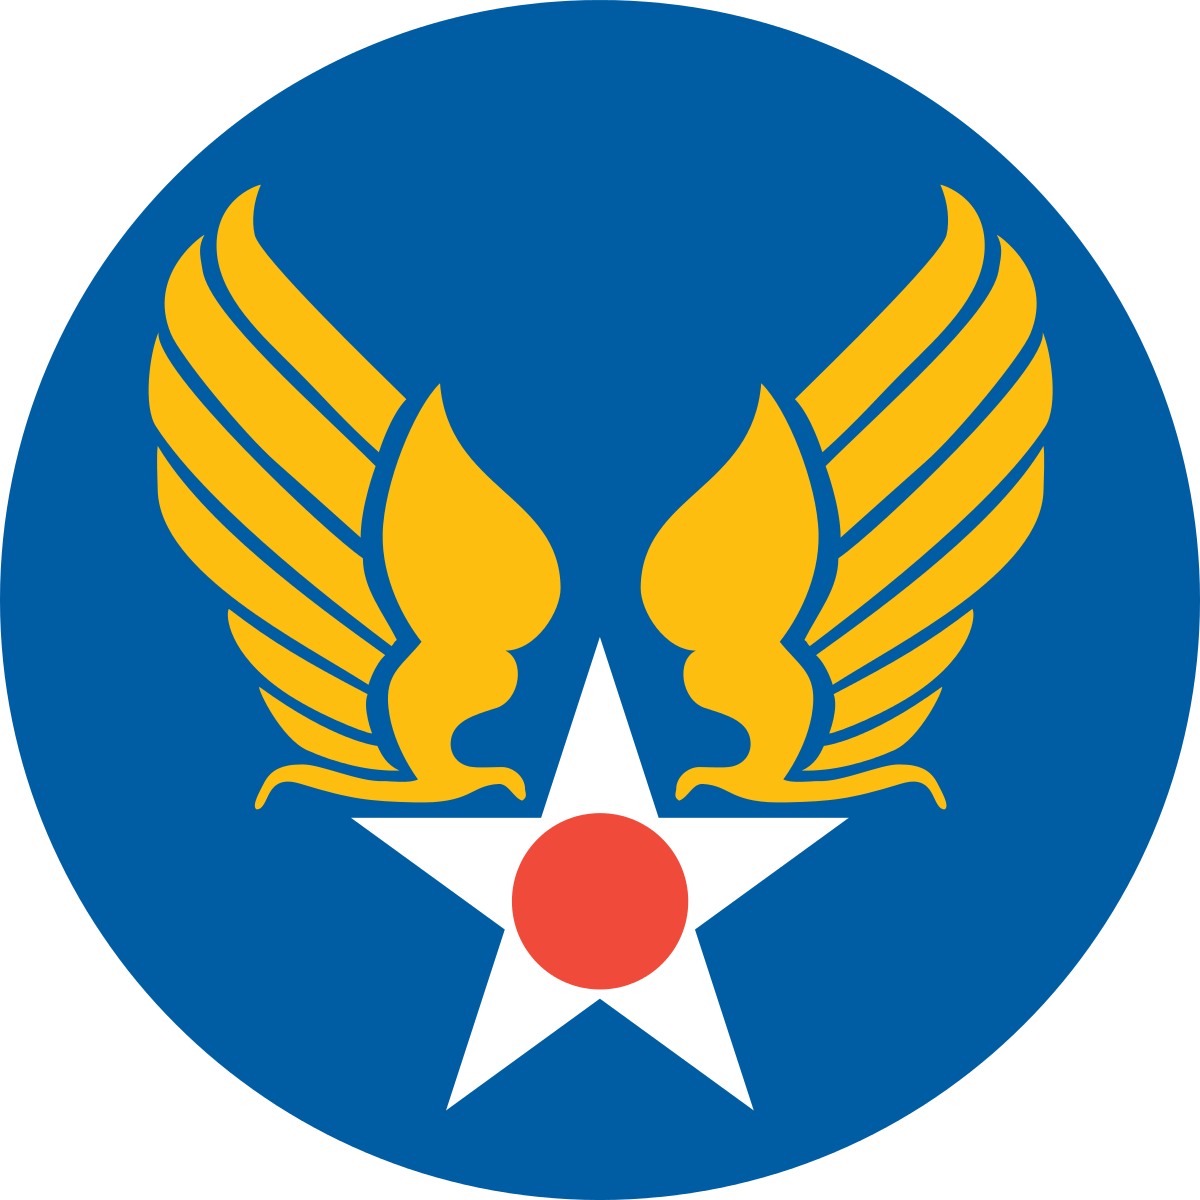 U.S. Army Air Force Logo - United States Army Air Forces